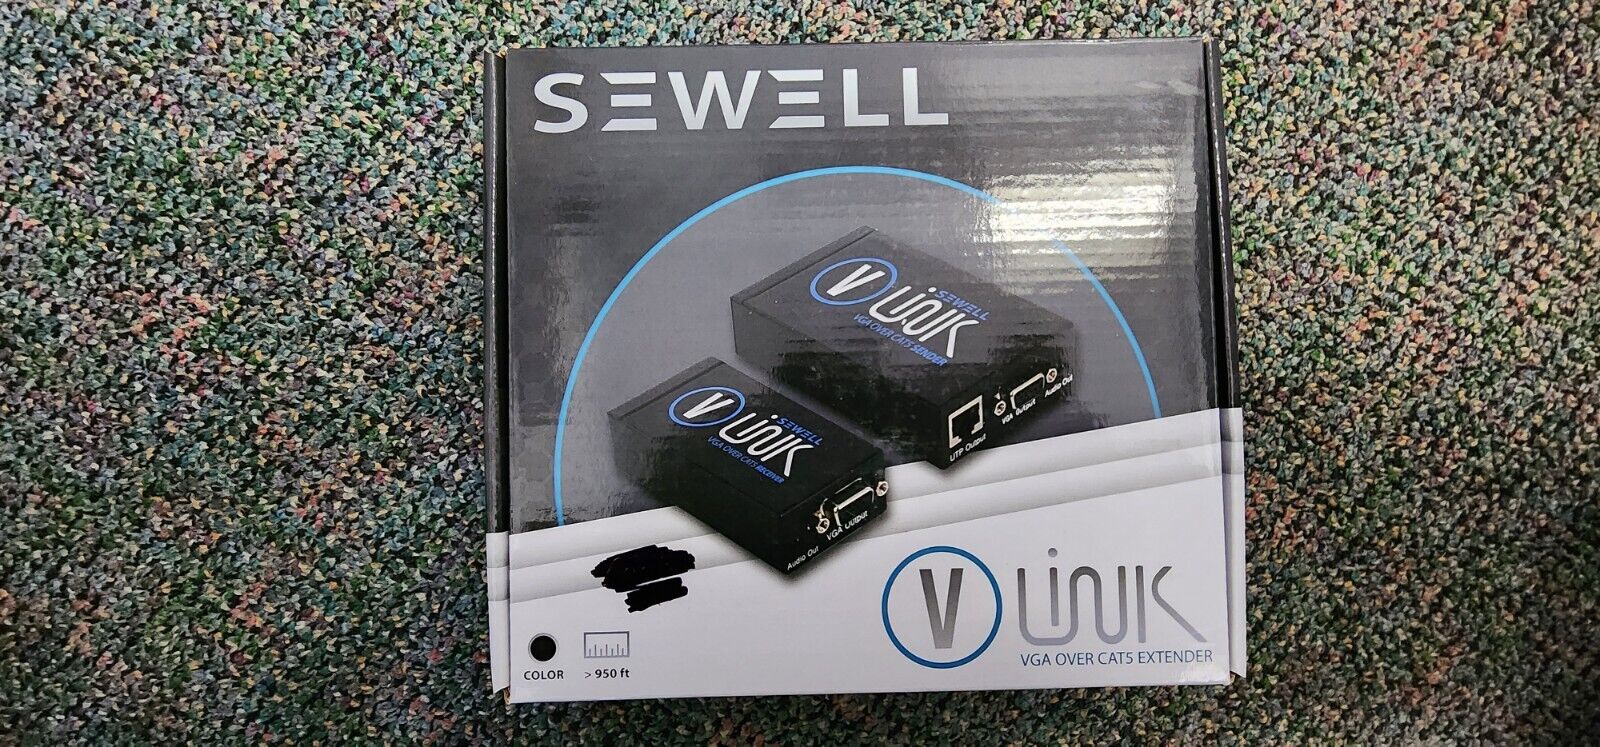 V-Link by Sewell Direct VGA Over Cat5 Extender with Audio 950 ft